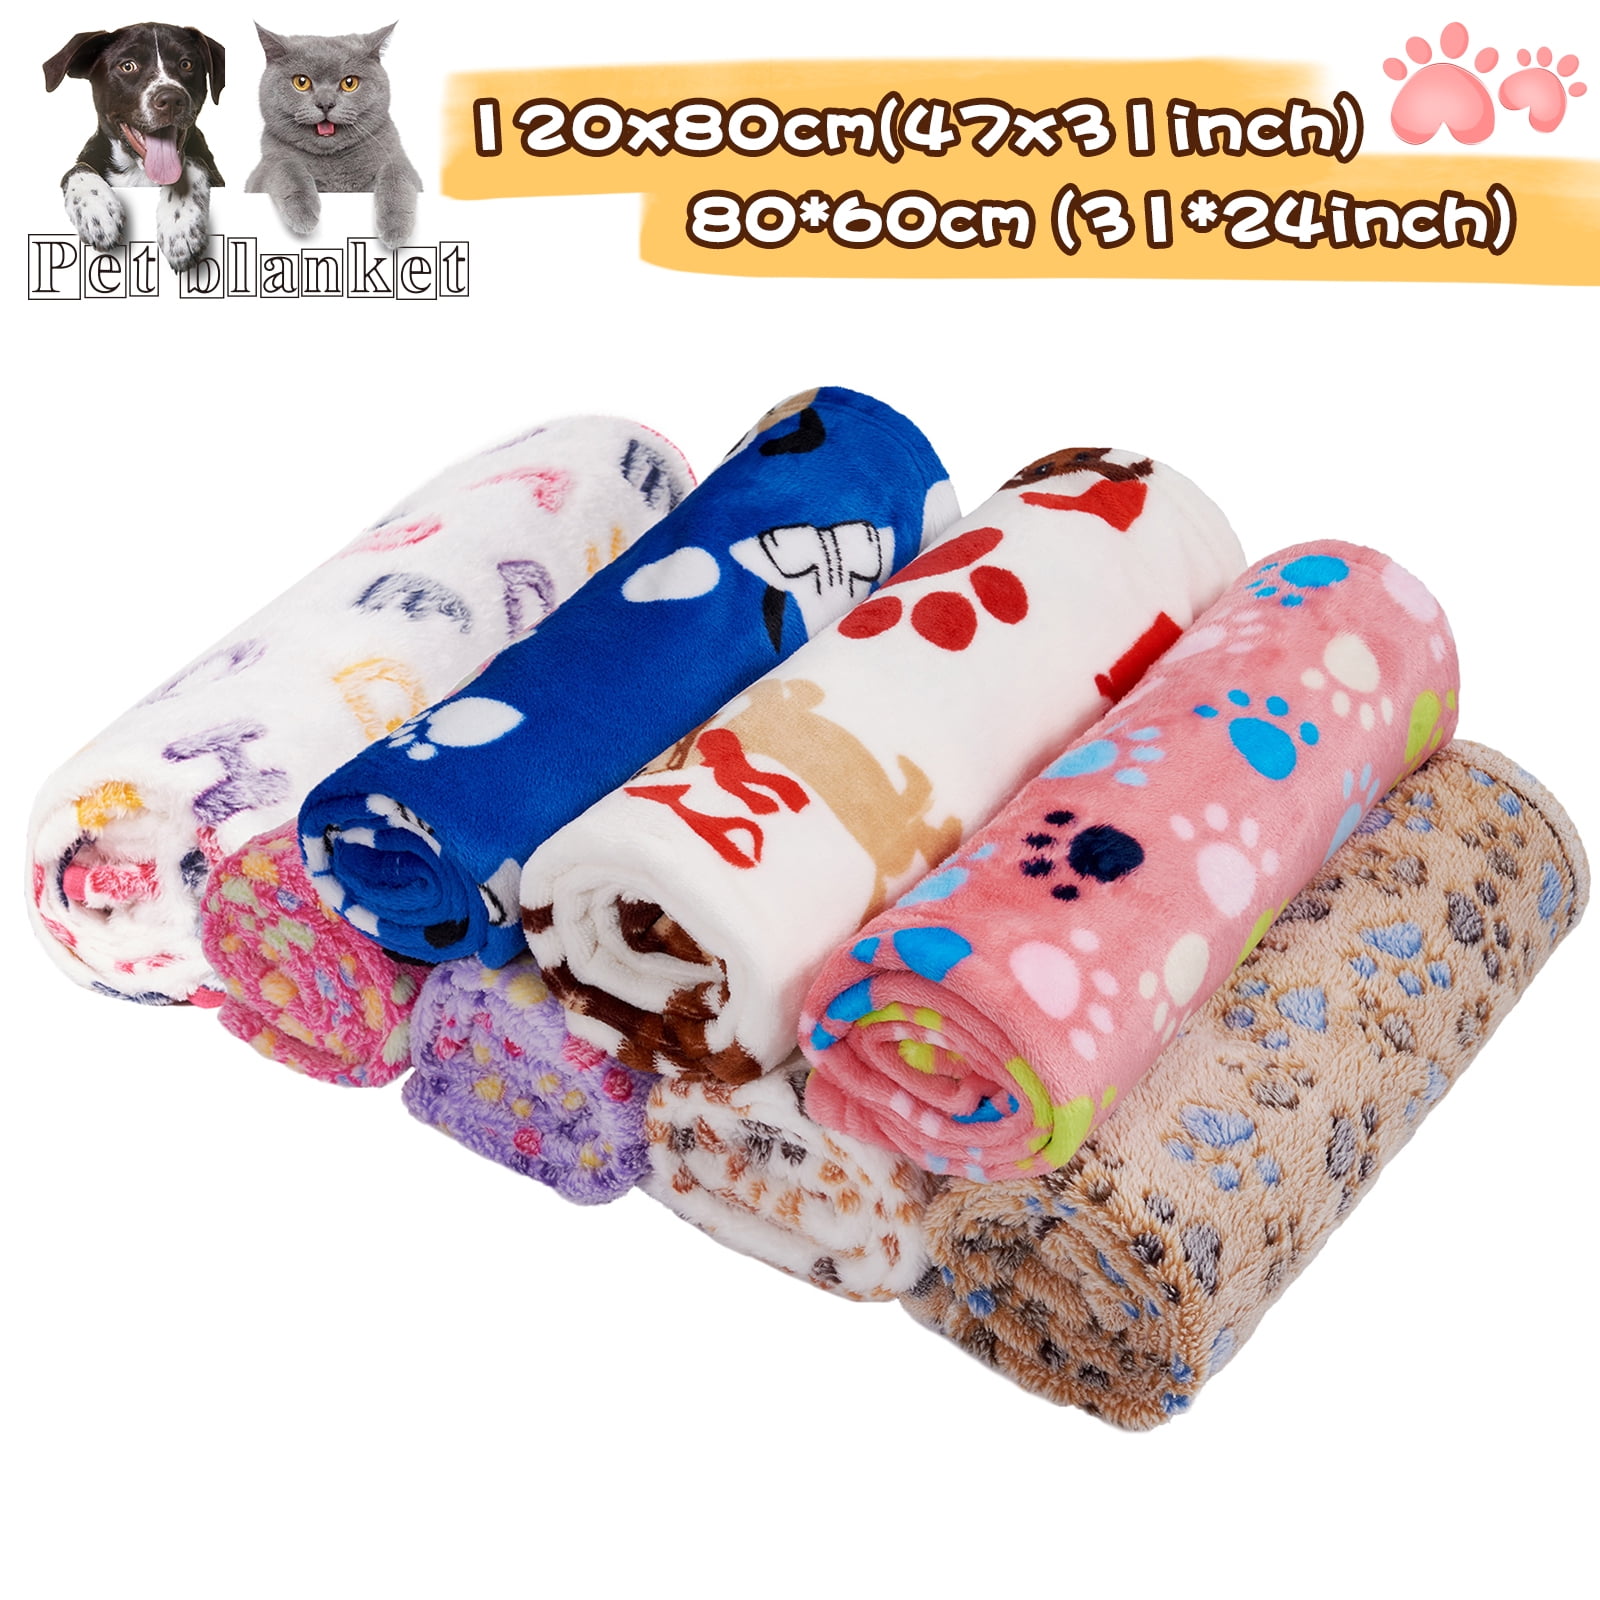 kiwitat/á Pet Dog Blanket Soft Warm Premium Flannel Fleece Dog Sleep Mat Bed Cover Puppy Throw Blankets for Kitties Puppies and Other Small Animals 41*30 inch